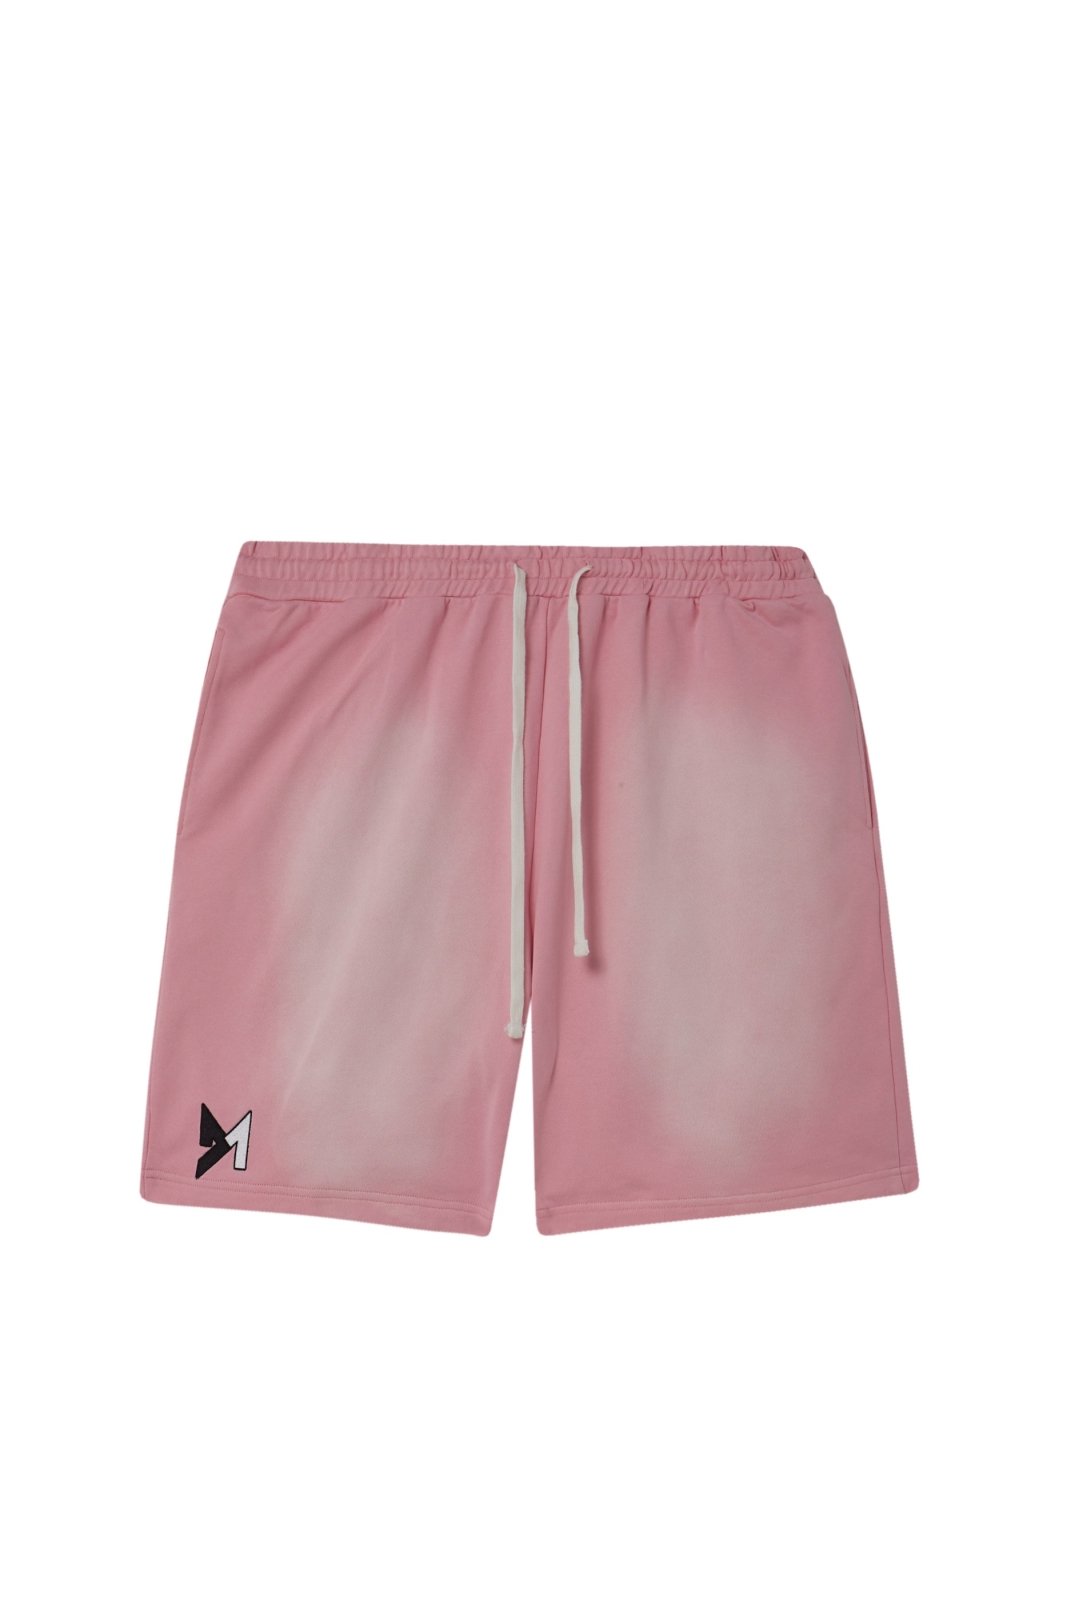 JOHNNY BOY SHORTS - Differently Made